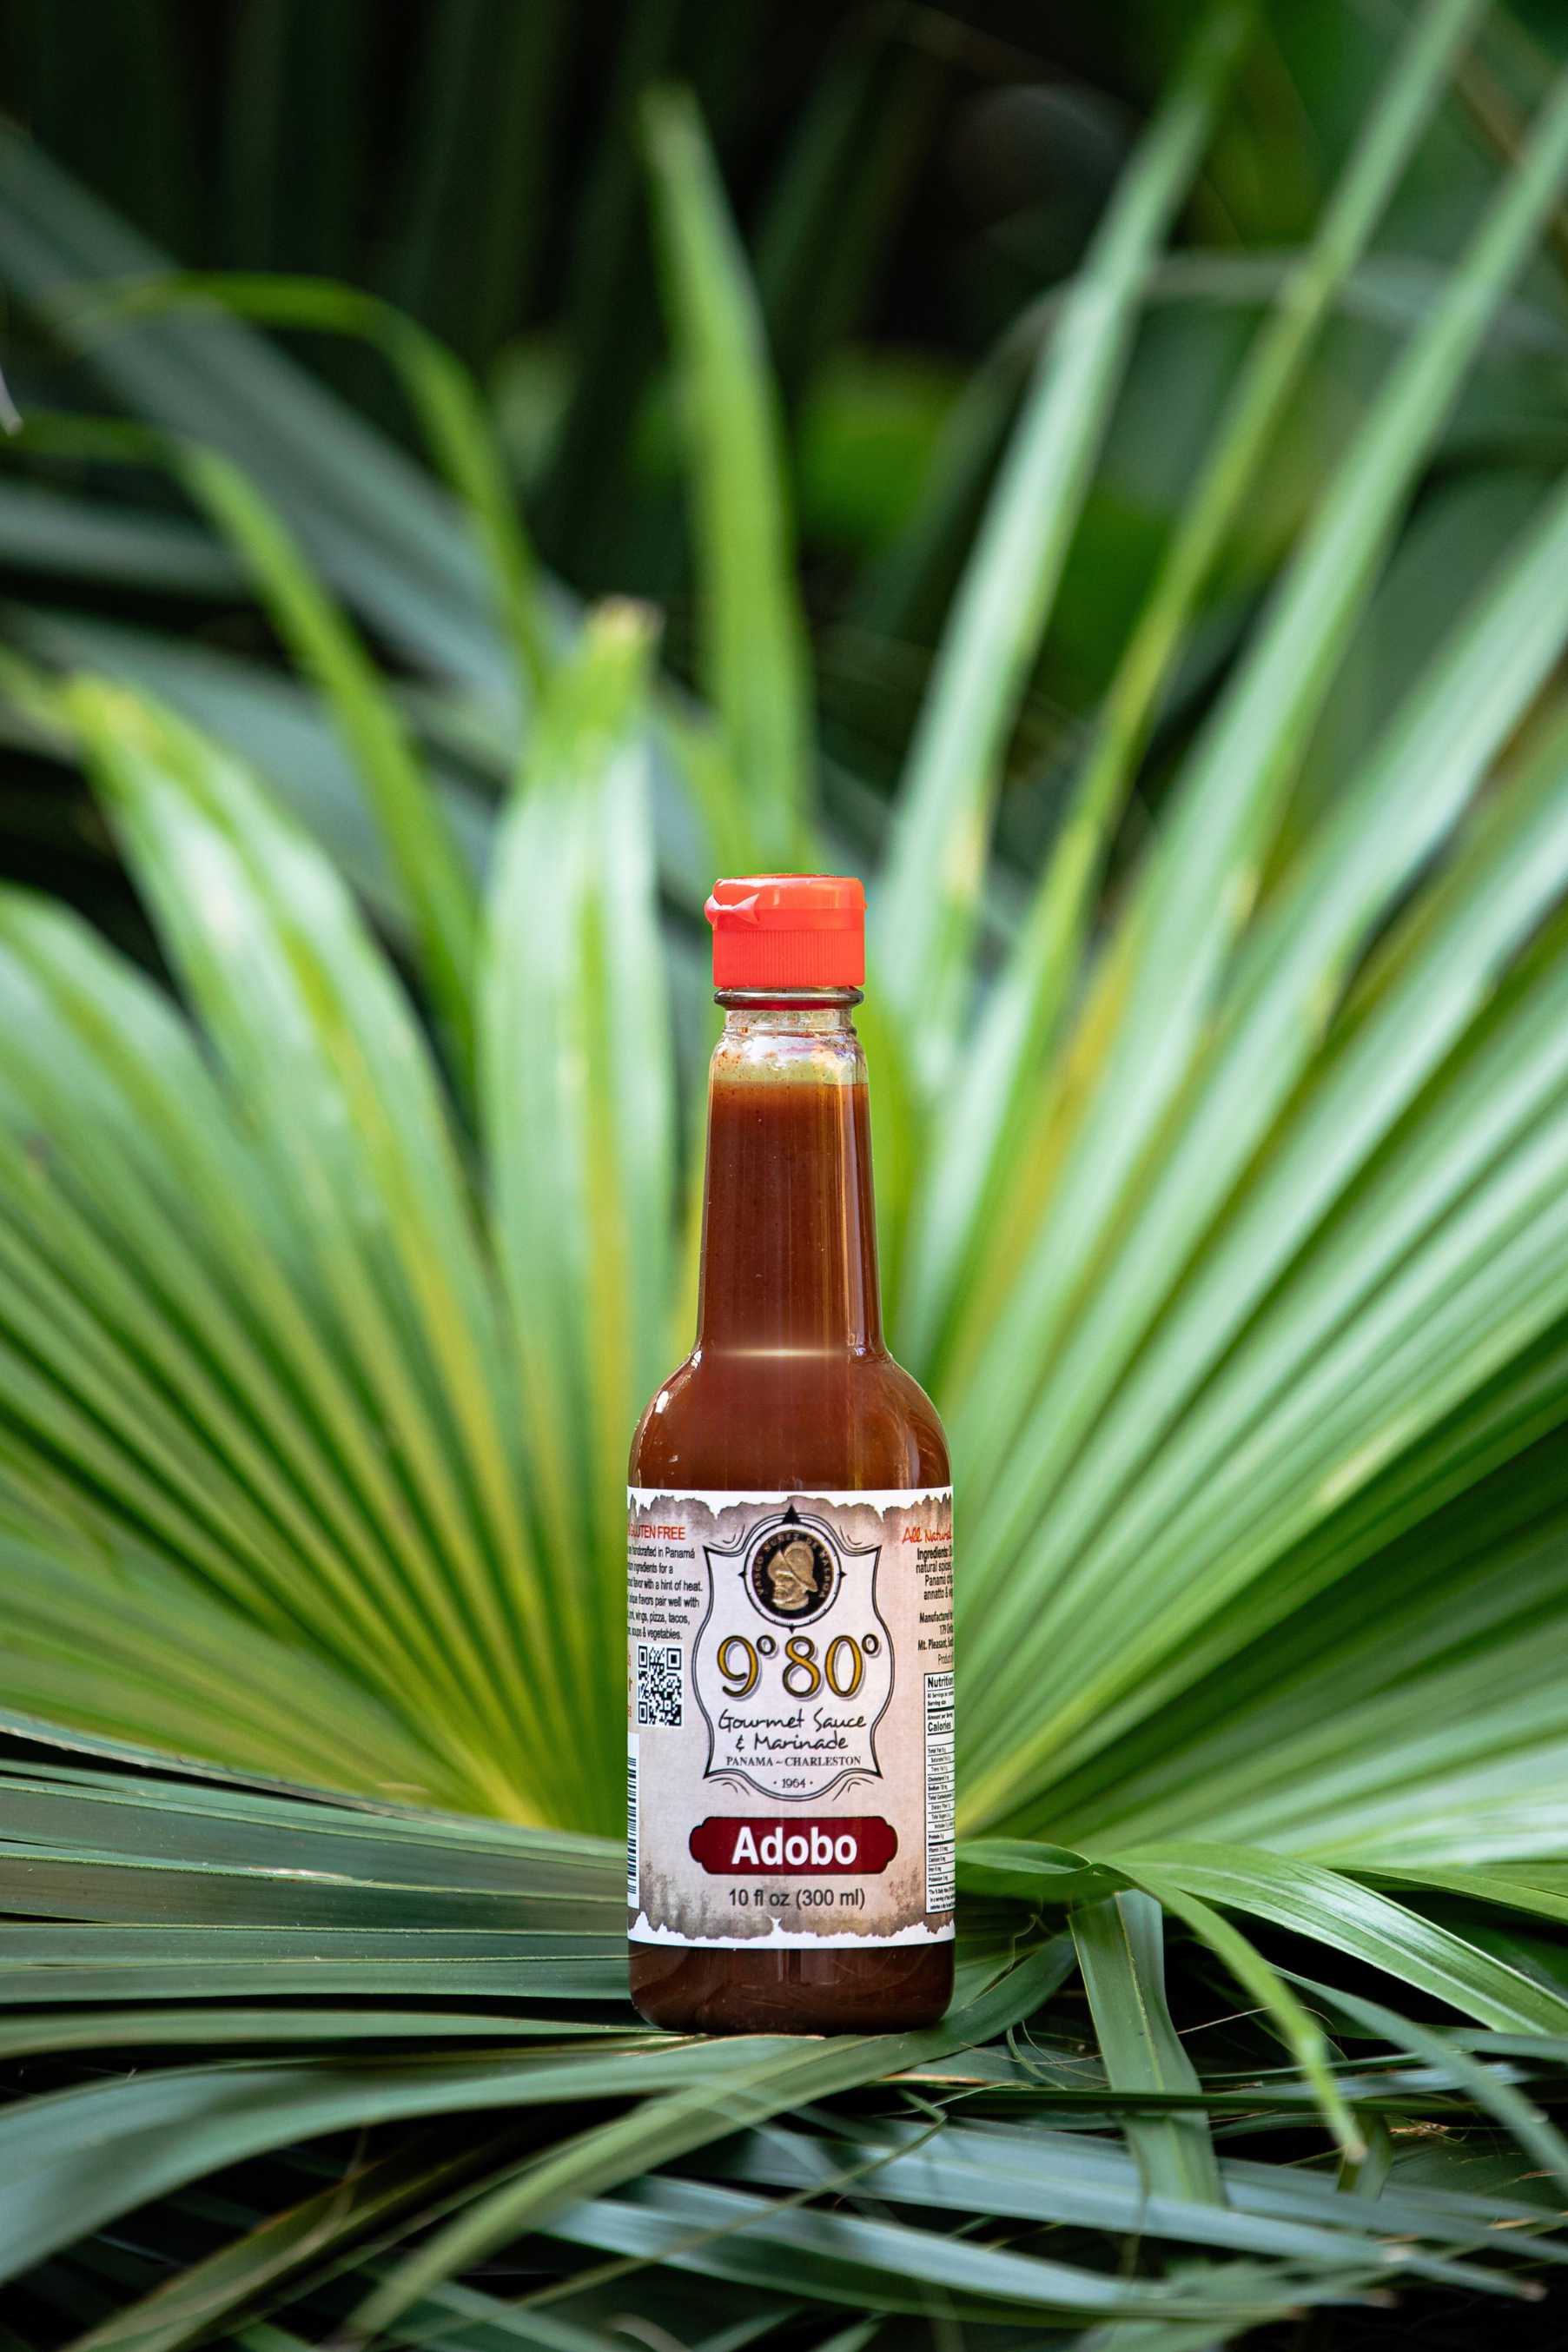 Adobo - 9°80° Gourmet Sauces and Marinades